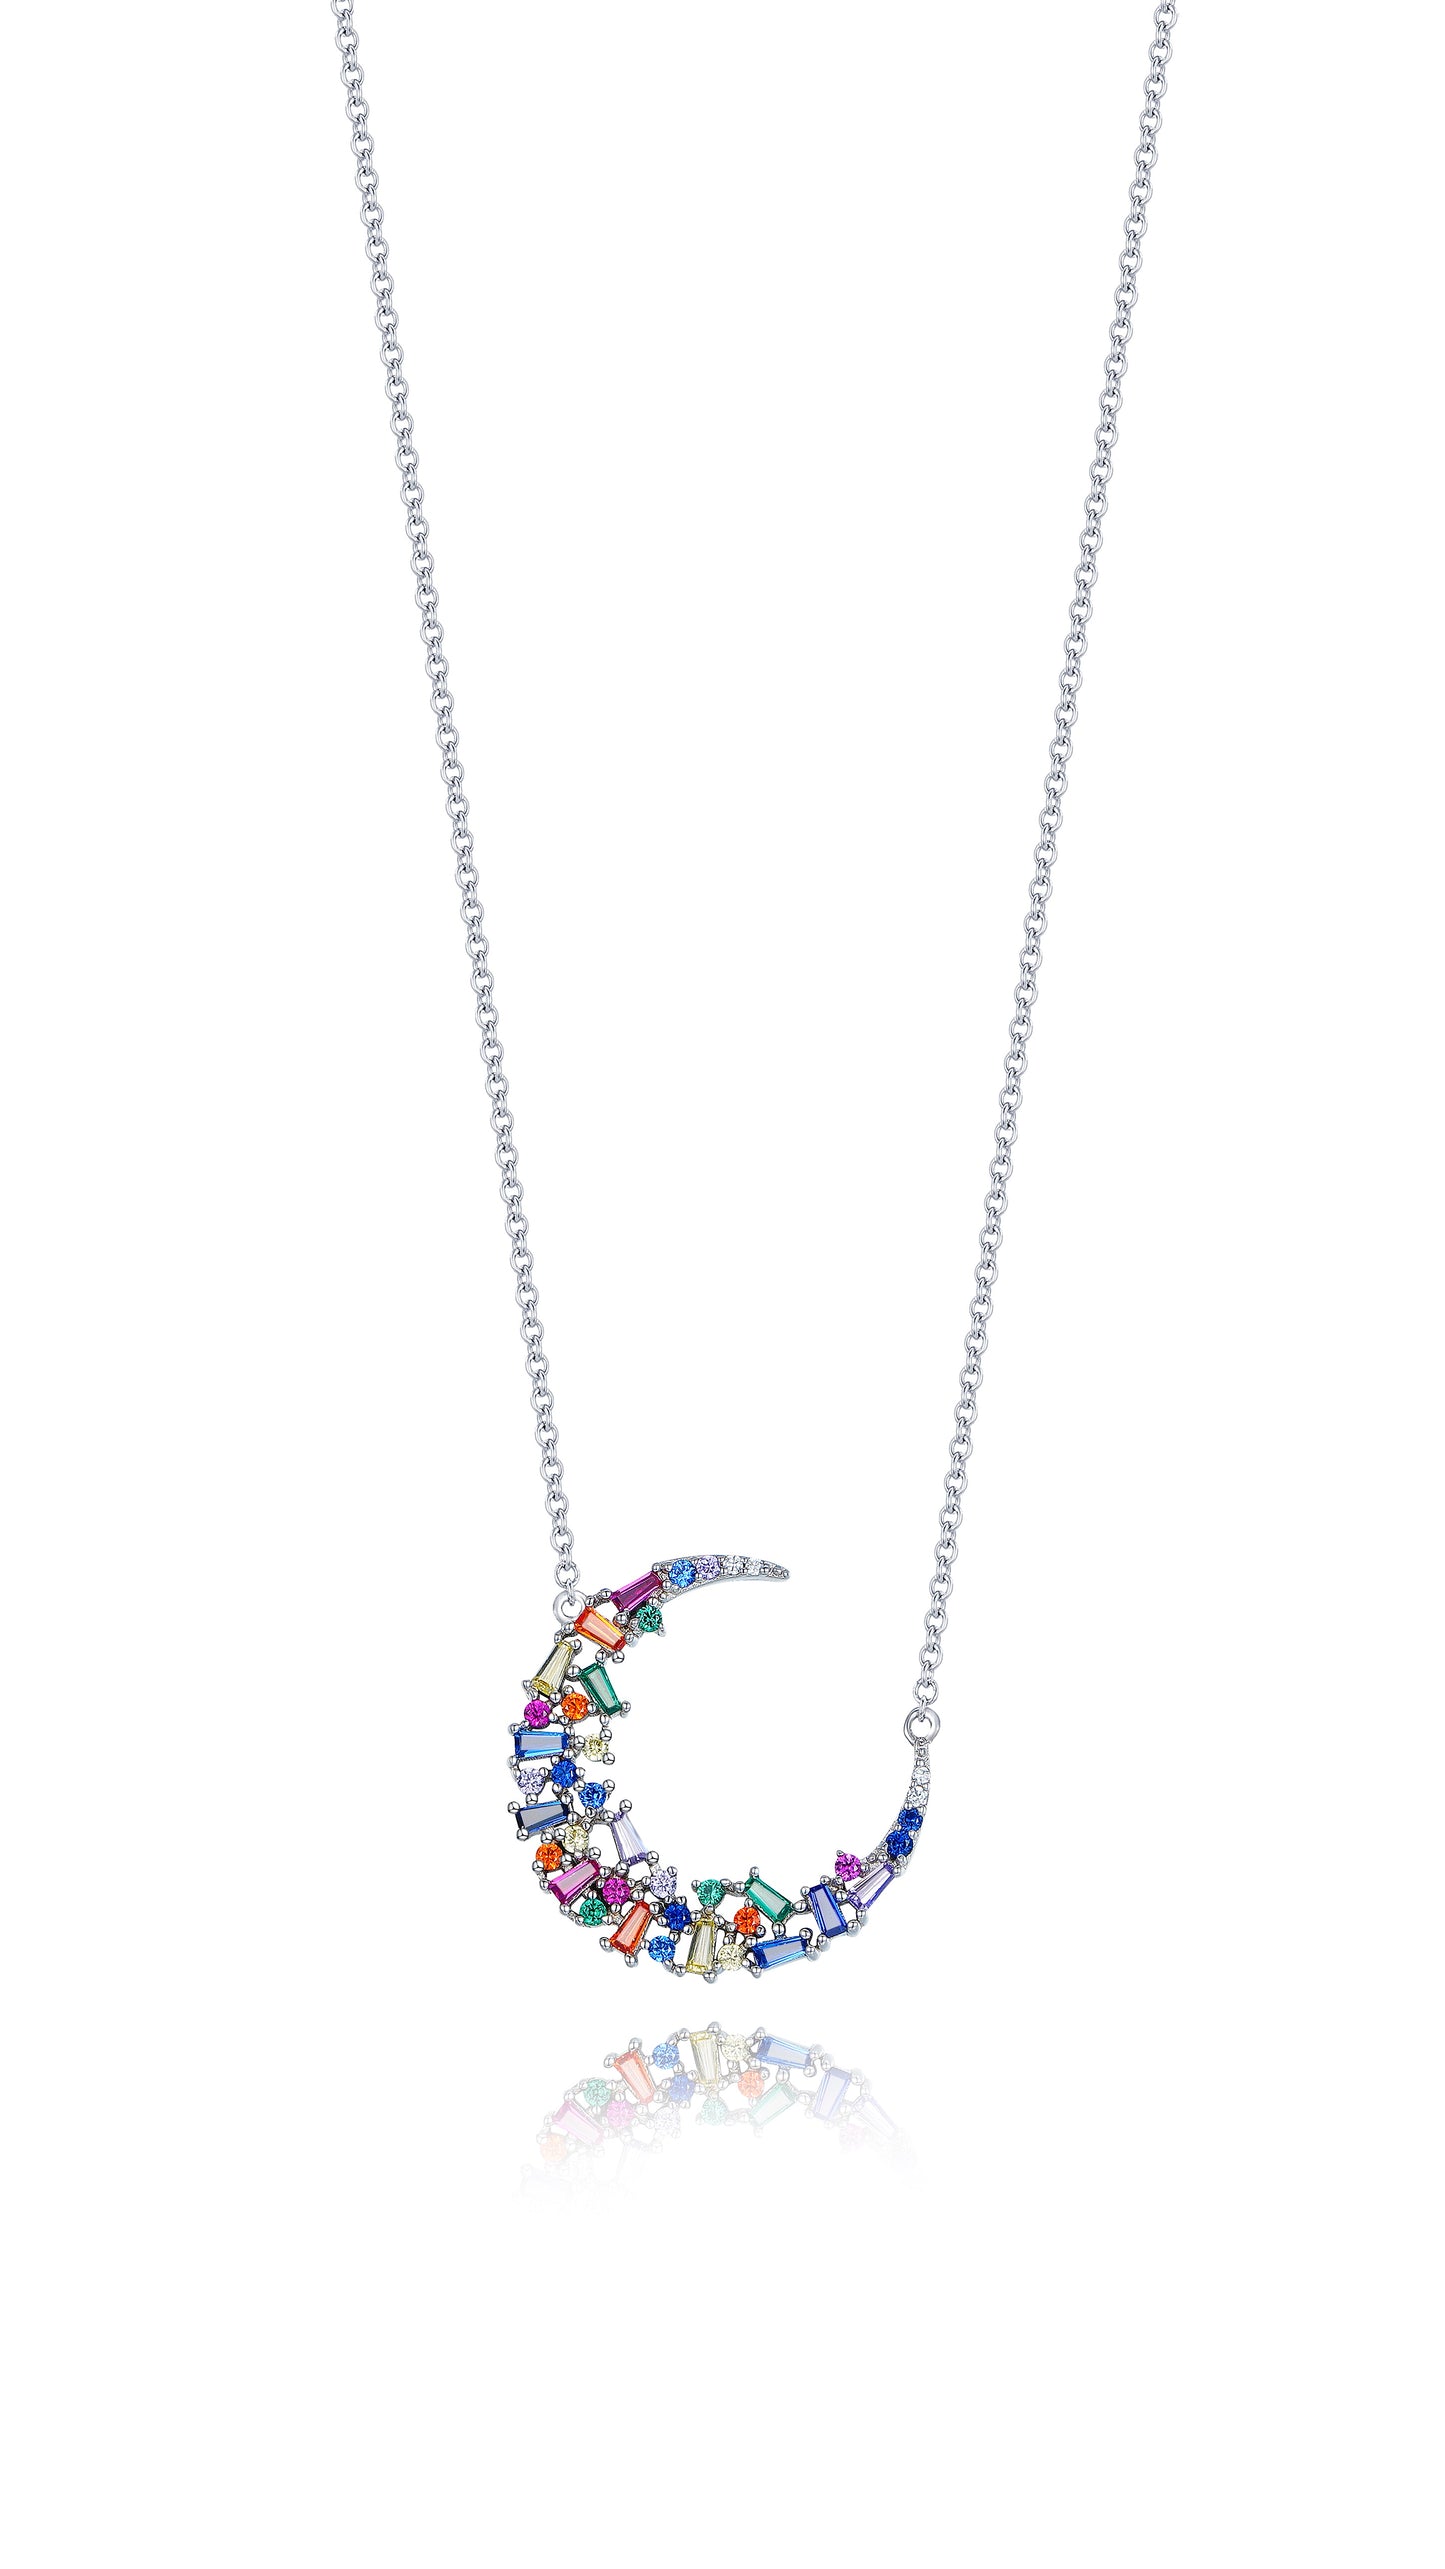 THIALH - Rainbow - White Sterling Silver Necklace